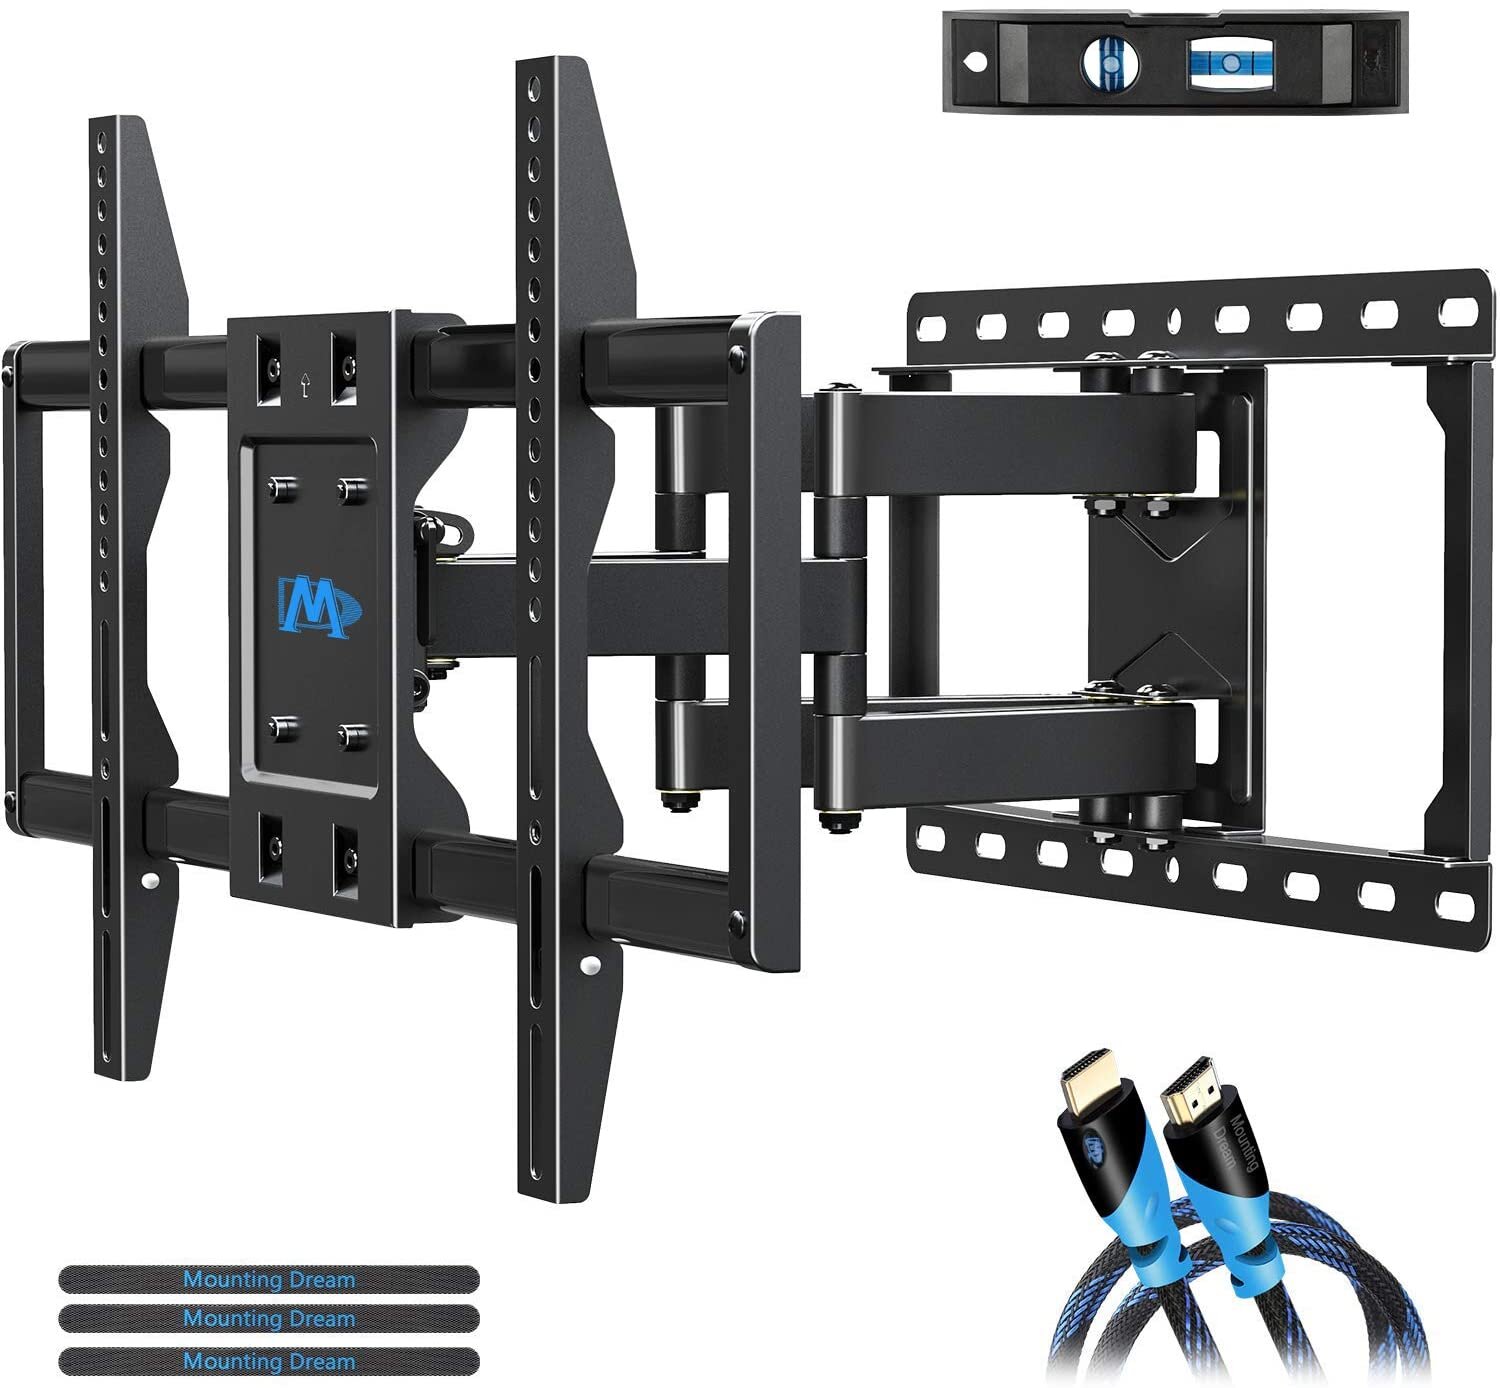 Mounting Dream Tilting Full Motion TV Mount for 26-55 Inch Flat Screen TV up to VESA 400x400mm and 60 lbs TV Wall Mount Bracket with Swivel Articulating Arm Perfect Center Design & Fits Single Stud 